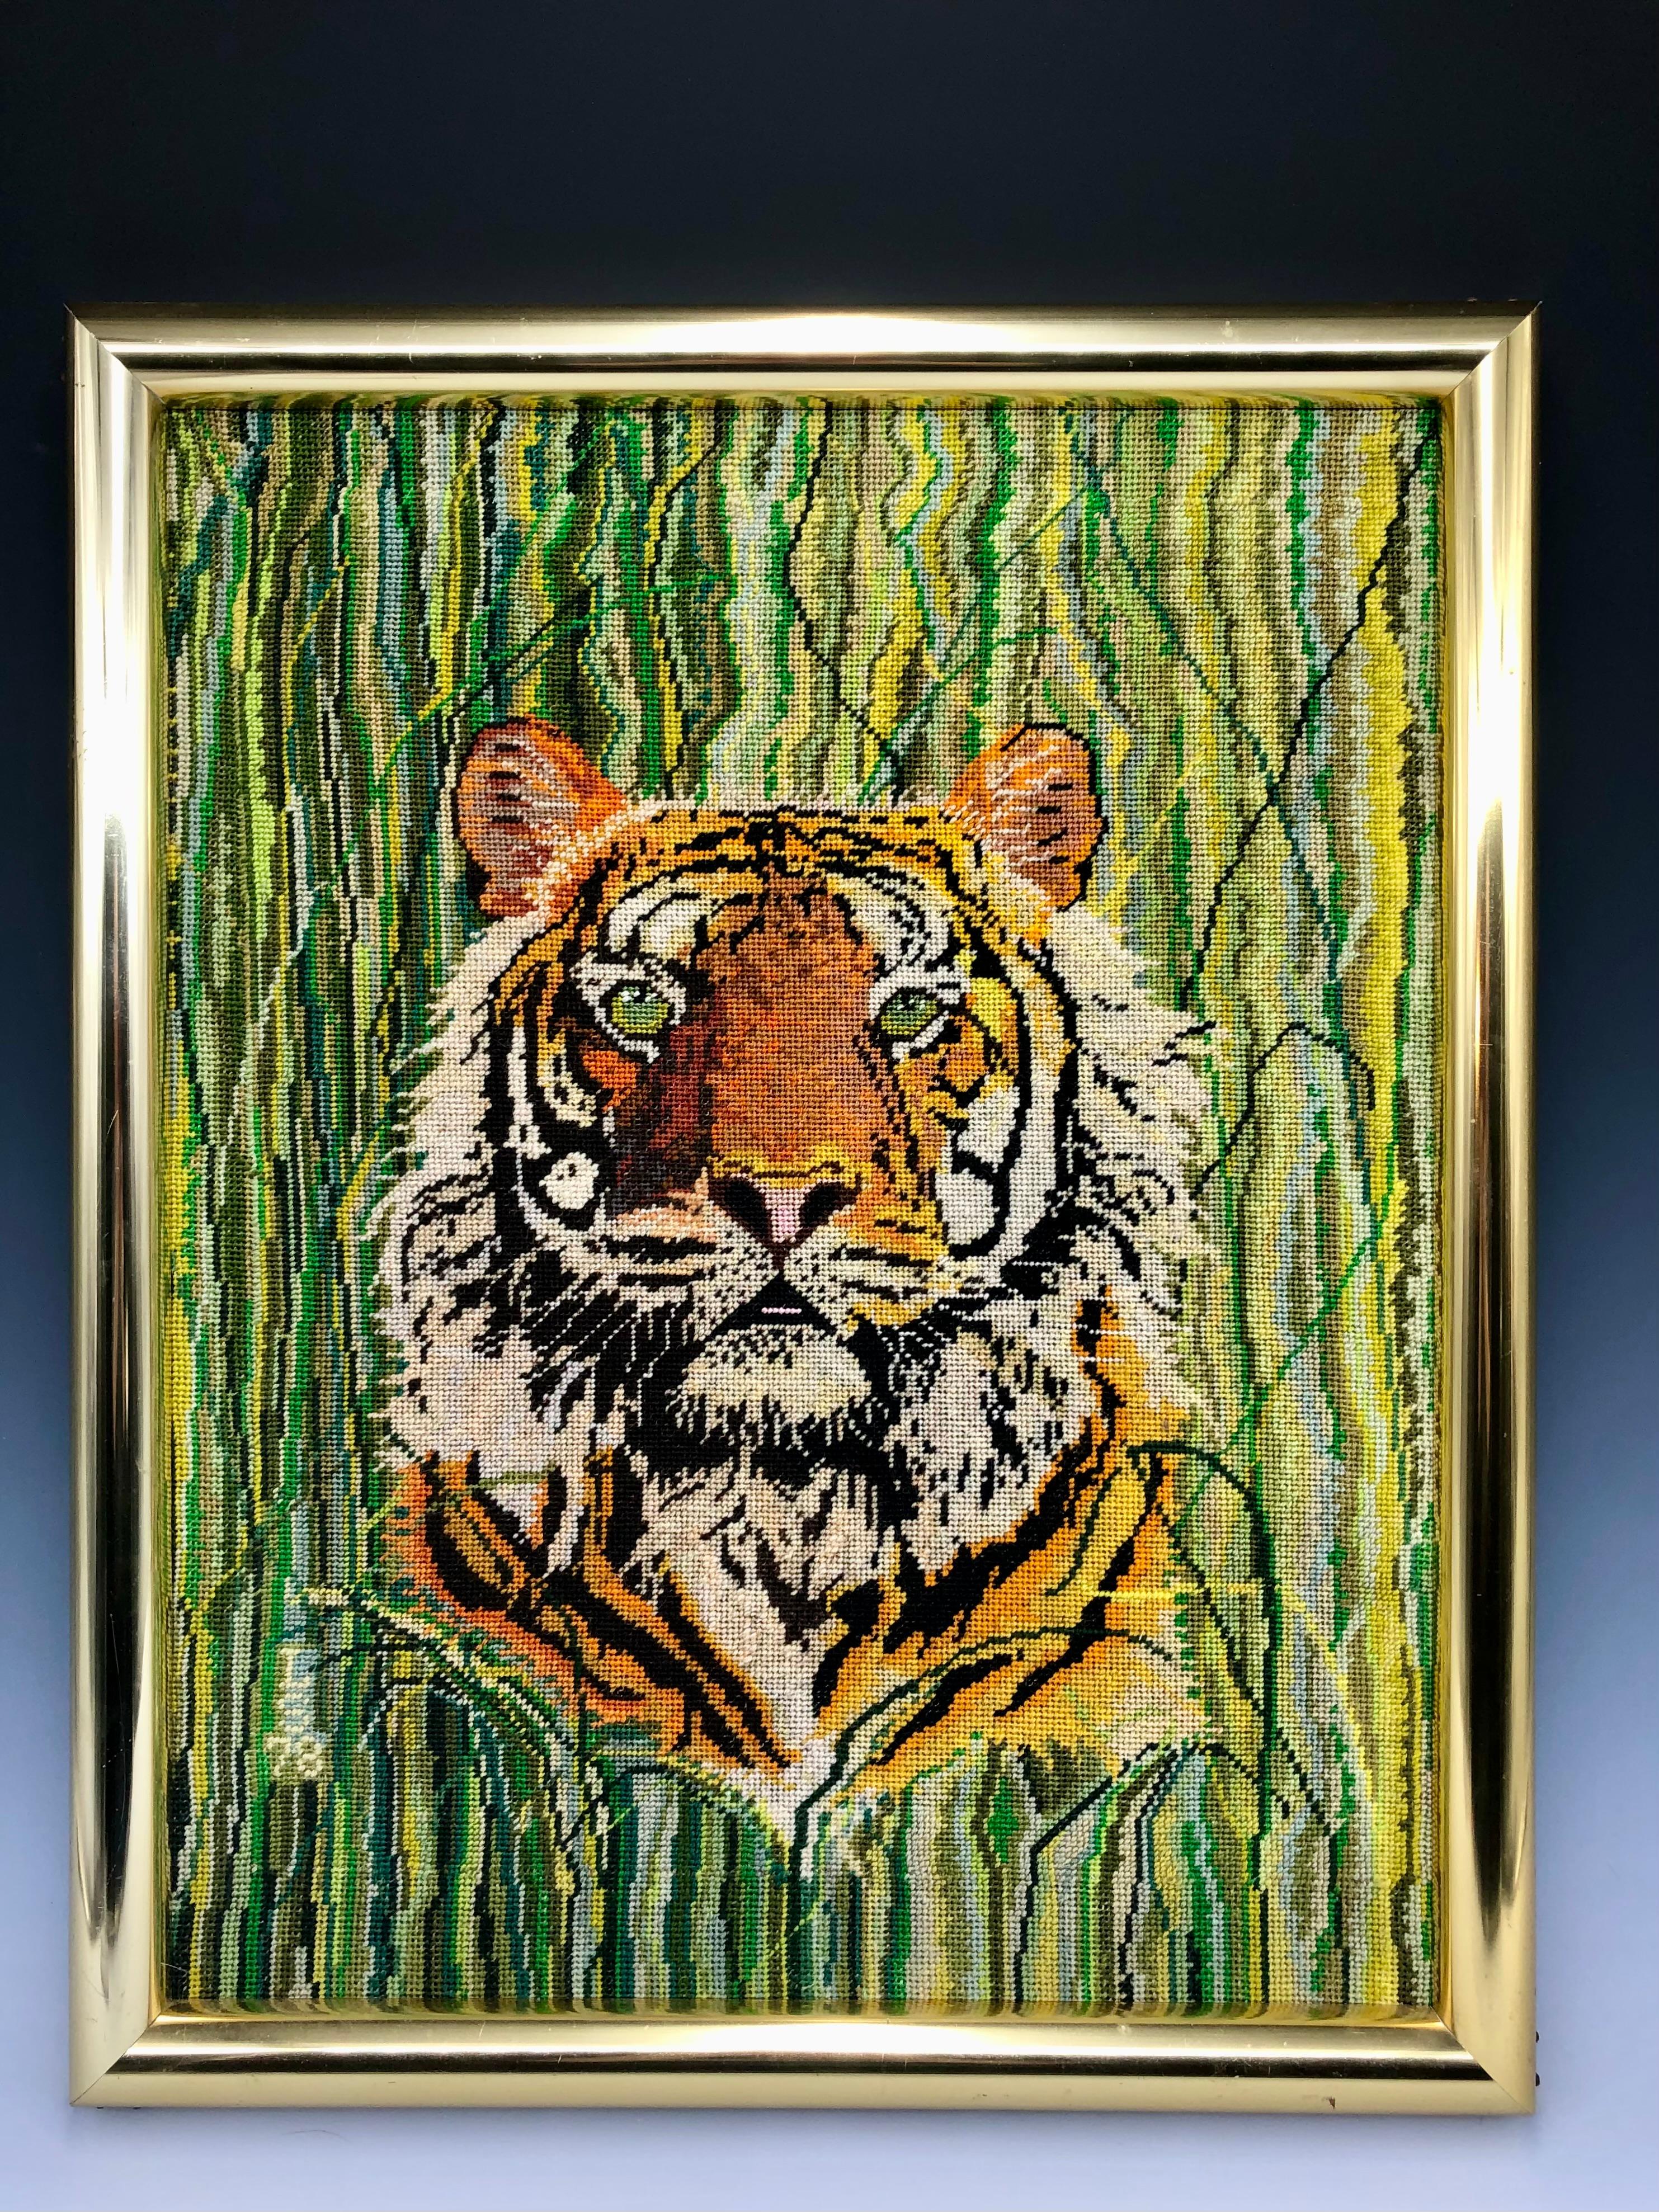 This striking 1970s embroidered tiger portrait has a striped green-toned grassy abstract background. 

The item comes framed in a thick brass frame. It is signed 